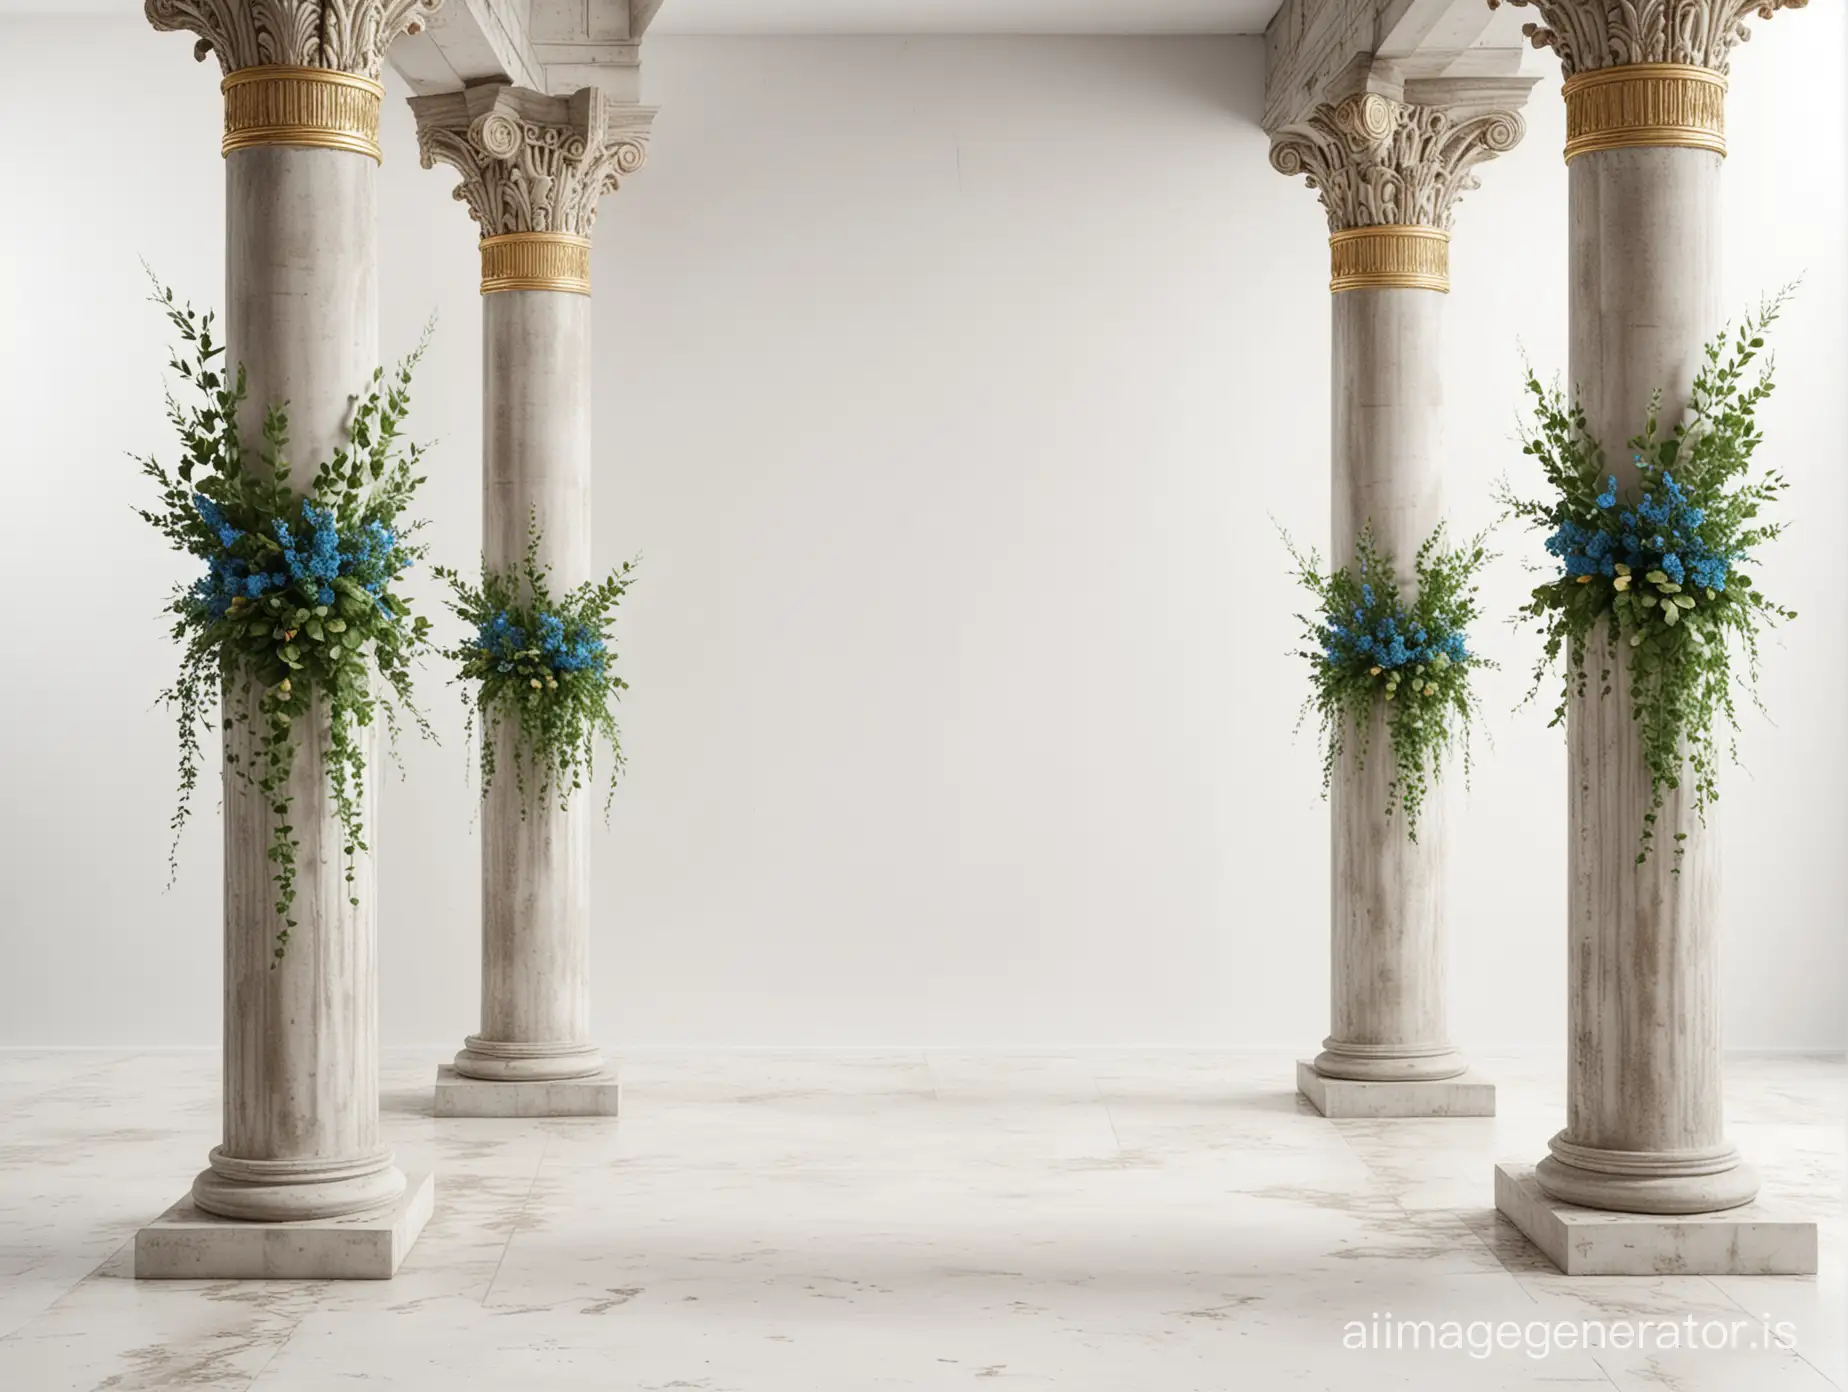 high concrete ancient columns, with golden and blue elements. Light white fabric is flying above. All this is decorated with green lianas and branches of cypress. On white background